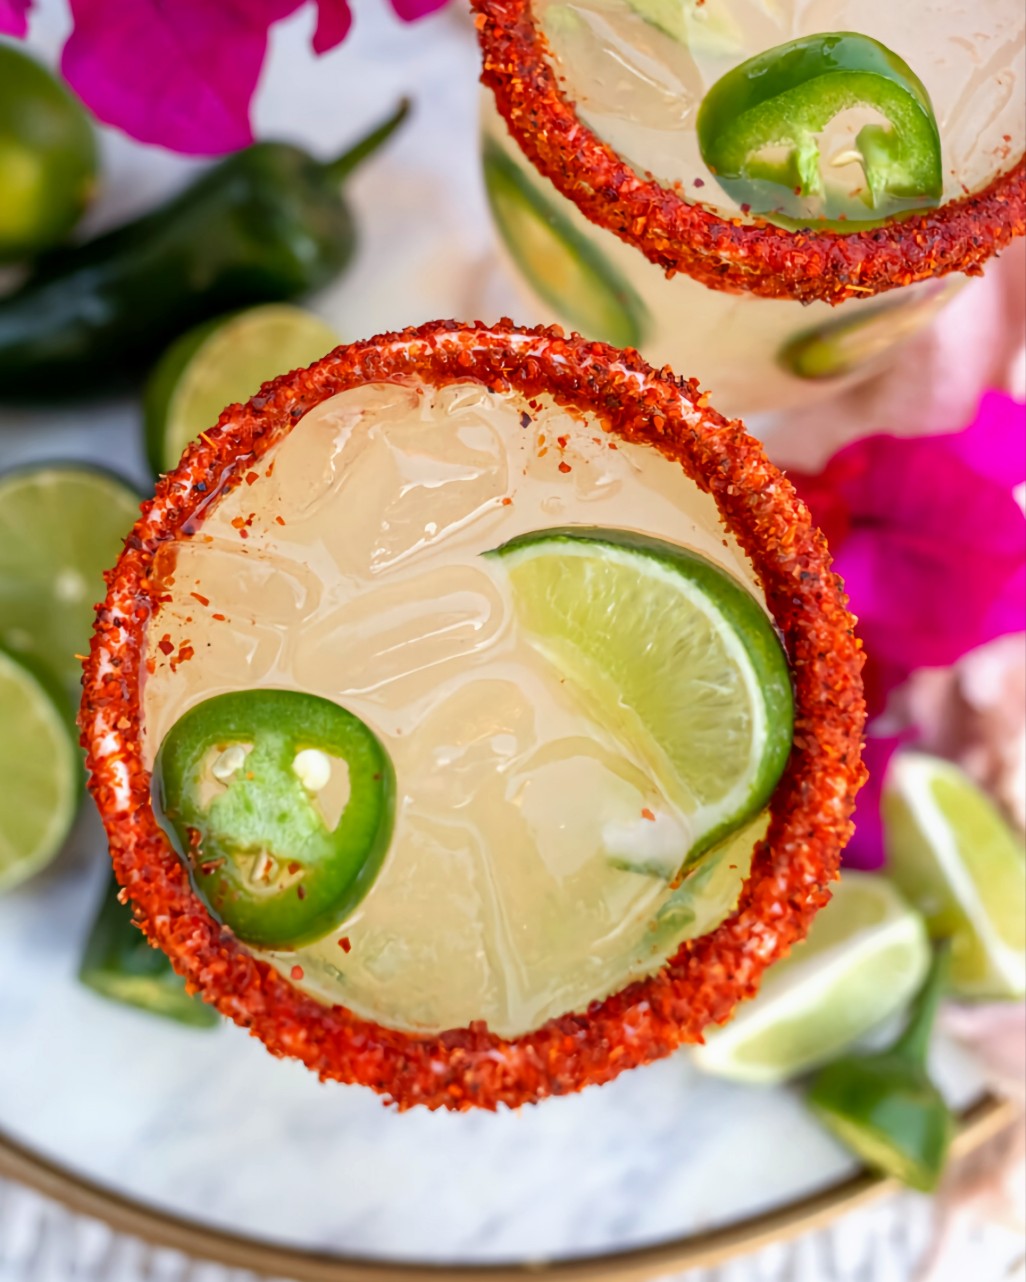 Rimmed Party Cups - Chelada Chili Lime | 6 Cups